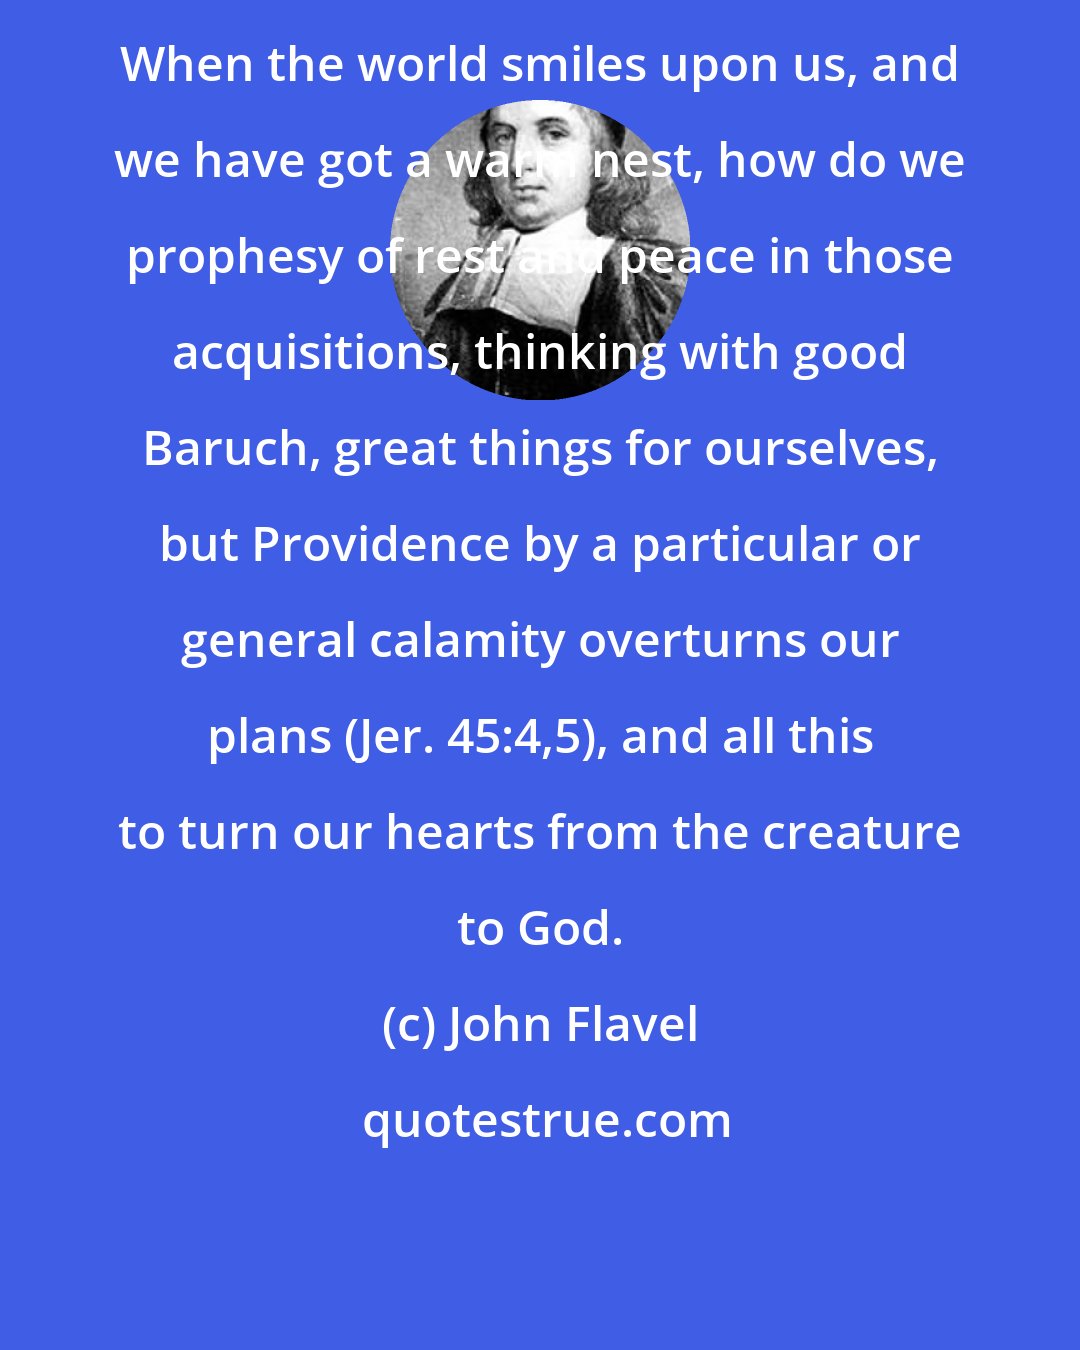 John Flavel: When the world smiles upon us, and we have got a warm nest, how do we prophesy of rest and peace in those acquisitions, thinking with good Baruch, great things for ourselves, but Providence by a particular or general calamity overturns our plans (Jer. 45:4,5), and all this to turn our hearts from the creature to God.